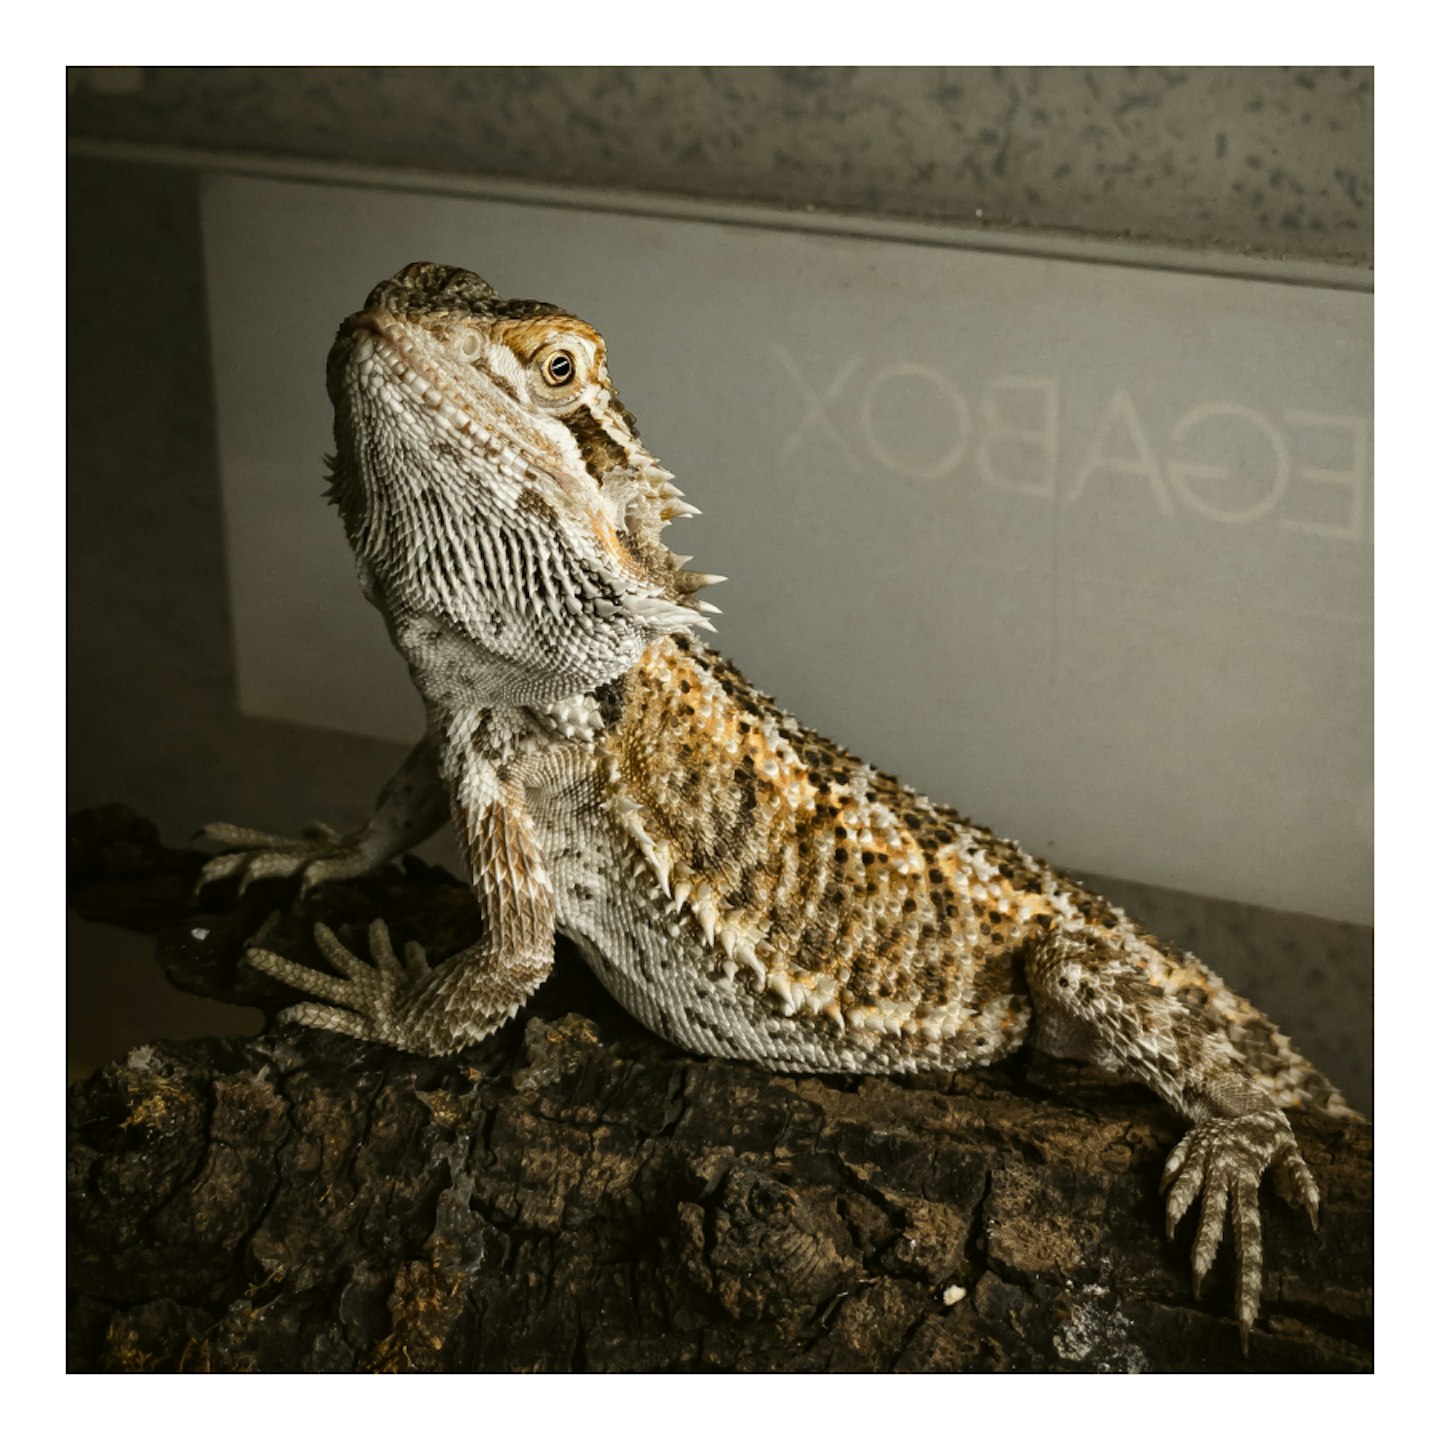 How To Care For Your Bearded Dragon